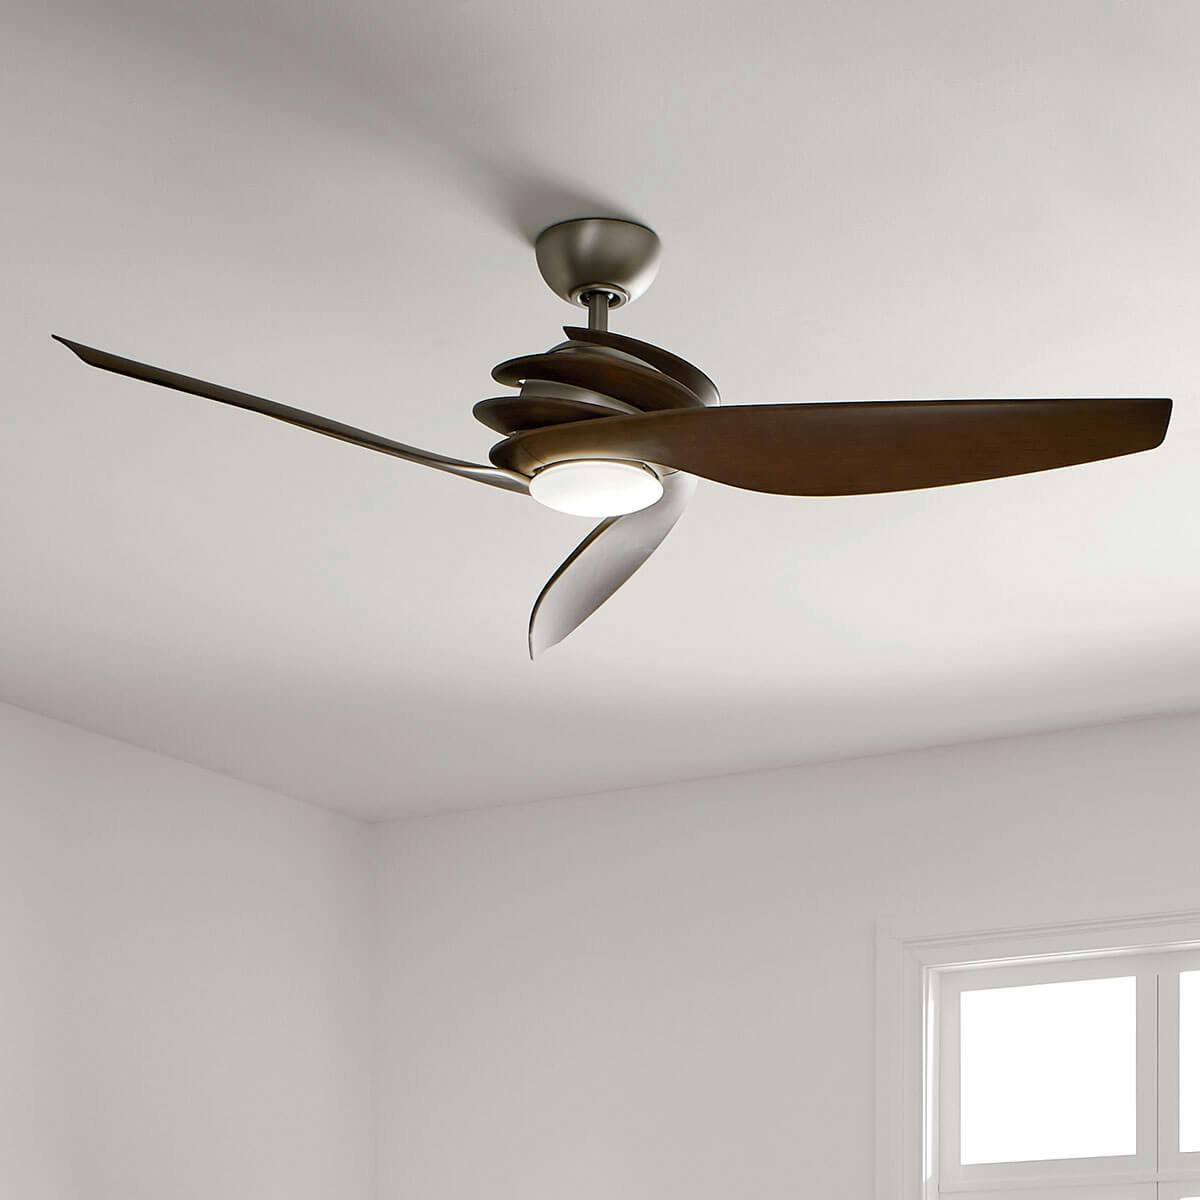 Day time living room image featuring Spyra ceiling fan 300700NI